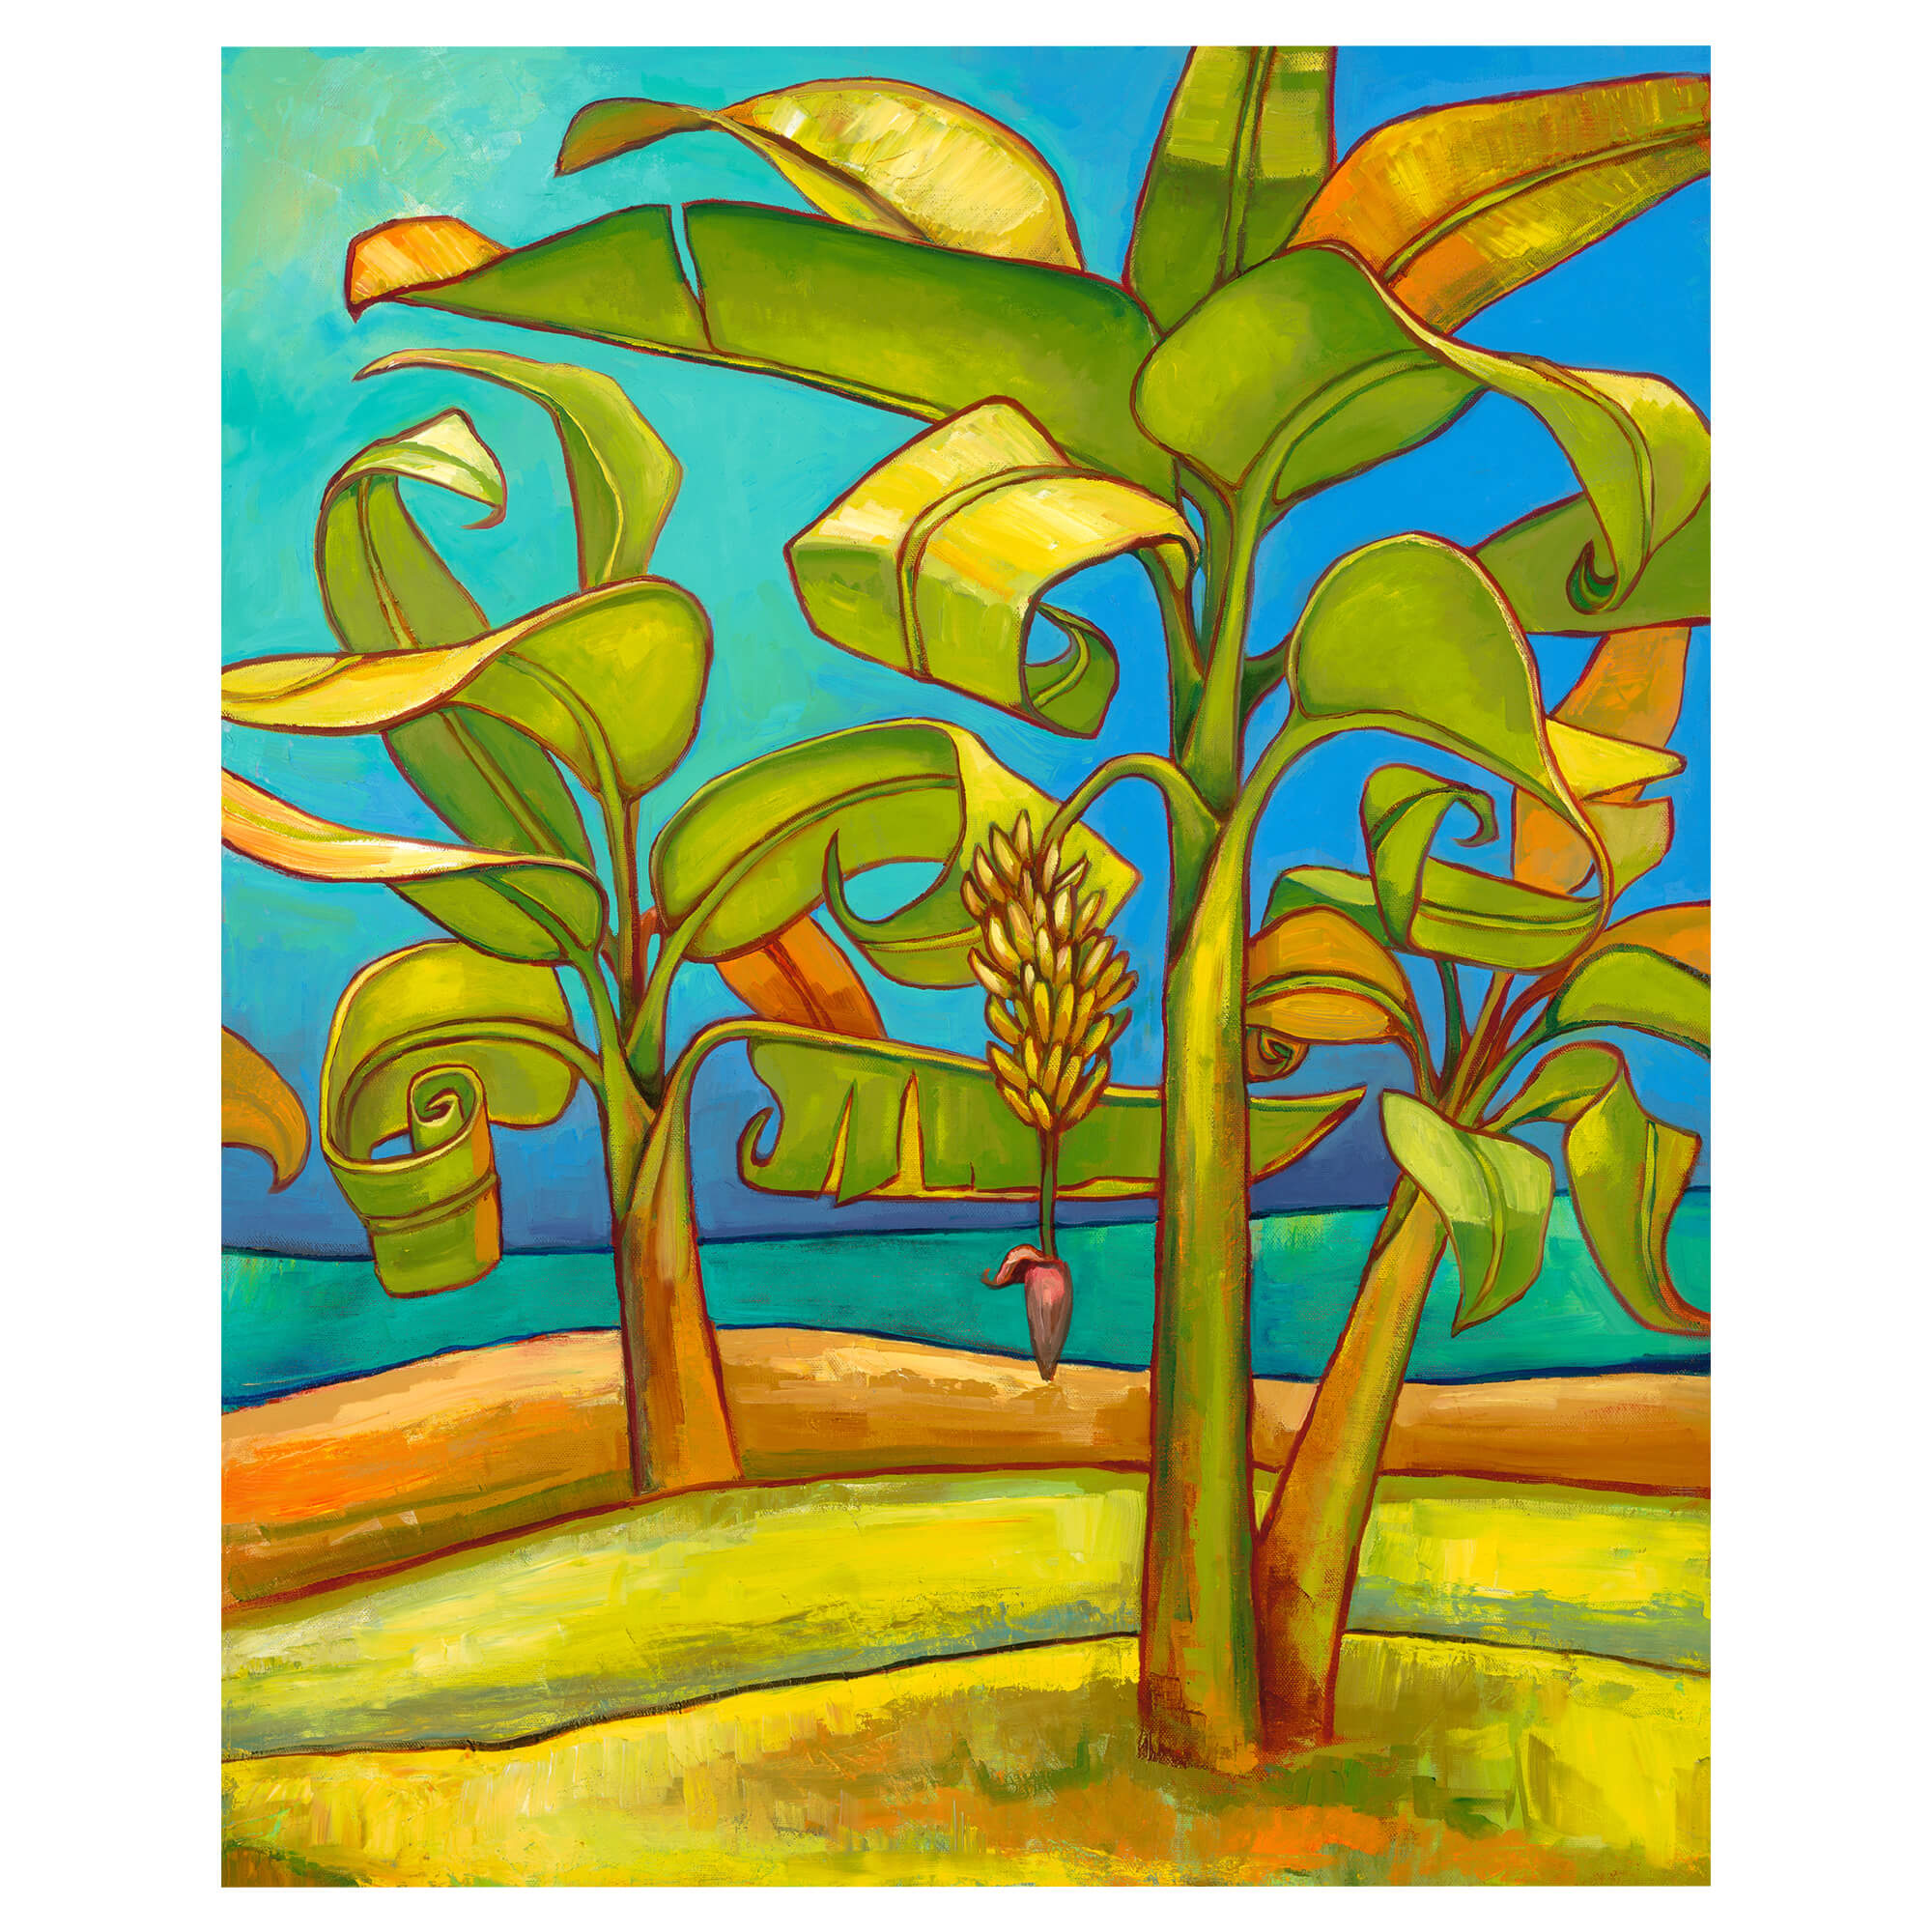 Banana trees with distant ocean view by Hawaii artist Colin Redican